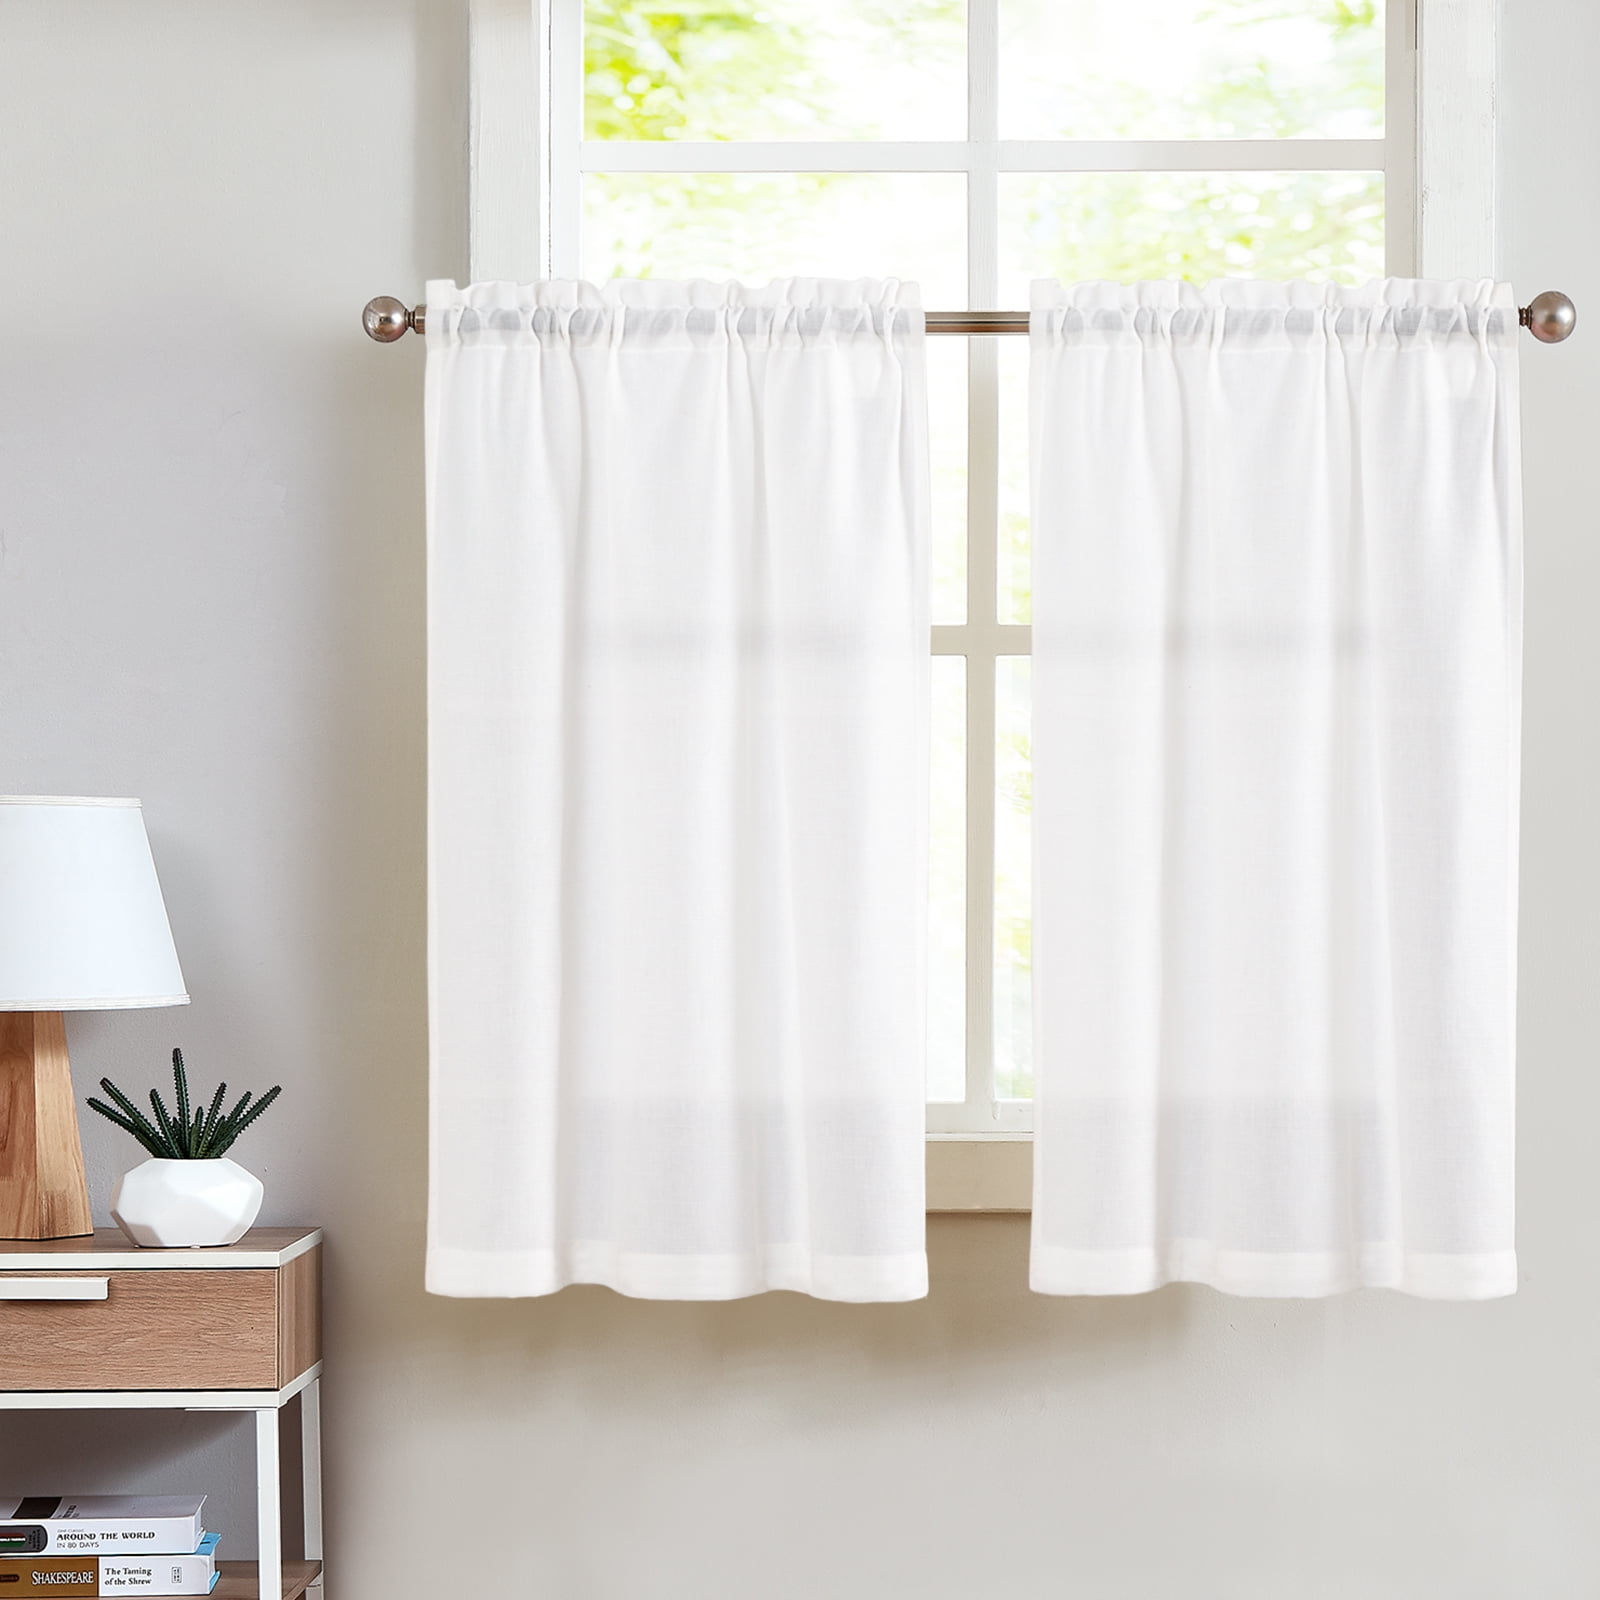 Topick White Kitchen Curtains Farmhouse Tier Curtains 24 inch Sheer ...